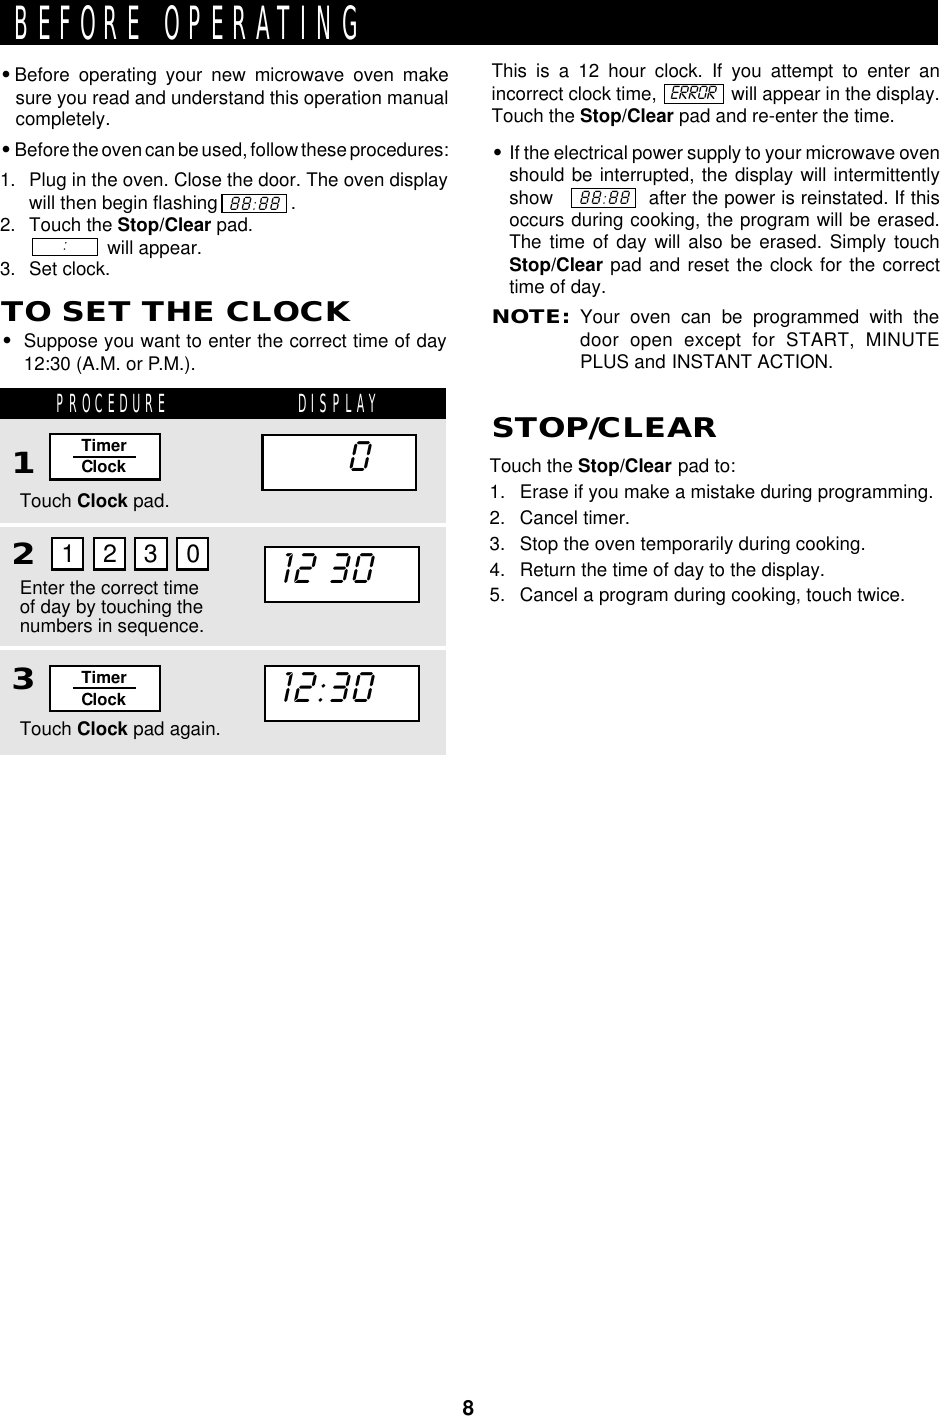 8This is a 12 hour clock. If you attempt to enter anincorrect clock time,               will appear in the display.Touch the Stop/Clear pad and re-enter the time.•If the electrical power supply to your microwave ovenshould be interrupted, the display will intermittentlyshow                after the power is reinstated. If thisoccurs during cooking, the program will be erased.The time of day will also be erased. Simply touchStop/Clear pad and reset the clock for the correcttime of day.NOTE:Your oven can be programmed with thedoor open except for START, MINUTEPLUS and INSTANT ACTION.•Before operating your new microwave oven makesure you read and understand this operation manualcompletely.•Before the oven can be used, follow these procedures:1. Plug in the oven. Close the door. The oven displaywill then begin flashing              .2. Touch the Stop/Clear pad.               will appear.3. Set clock.BEFORE OPERATING88:88:ERRORTouch the Stop/Clear pad to:1. Erase if you make a mistake during programming.2. Cancel timer.3. Stop the oven temporarily during cooking.4. Return the time of day to the display.5. Cancel a program during cooking, touch twice.88:88TO SET THE CLOCK•Suppose you want to enter the correct time of day12:30 (A.M. or P.M.).PROCEDURE DISPLAY123STOP/CLEARTouch Clock pad.Touch Clock pad again.Enter the correct timeof day by touching thenumbers in sequence.1 2 3 012:30TimerClockTimerClock12:3012:30